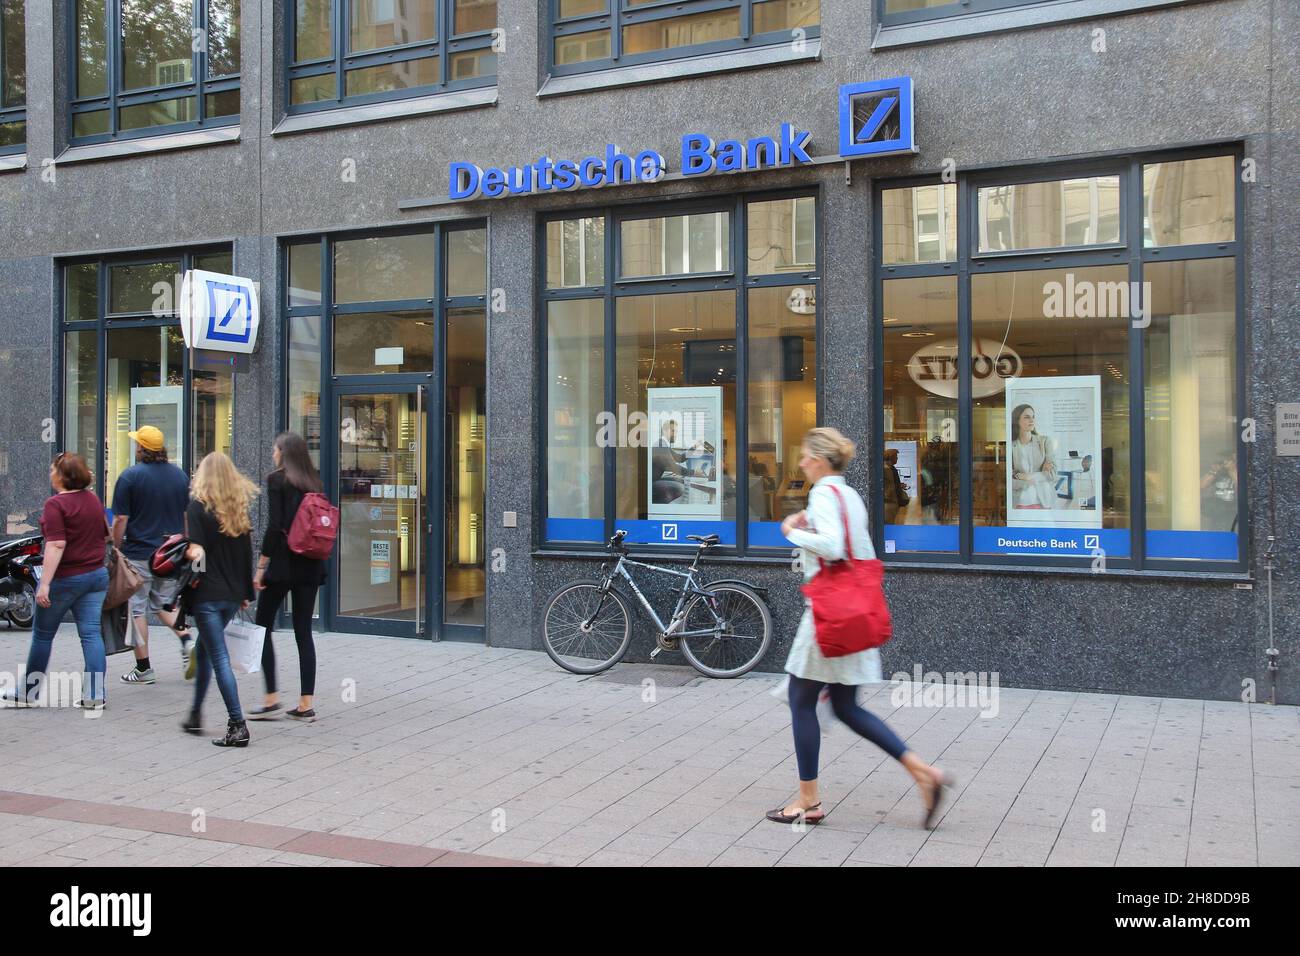 HAMBURG, GERMANY - AUGUST 28, 2014: Deutsche Bank branch in Hamburg. Deutsche Bank is one of largest banks in the world with 98,200 employees (2013). Stock Photo